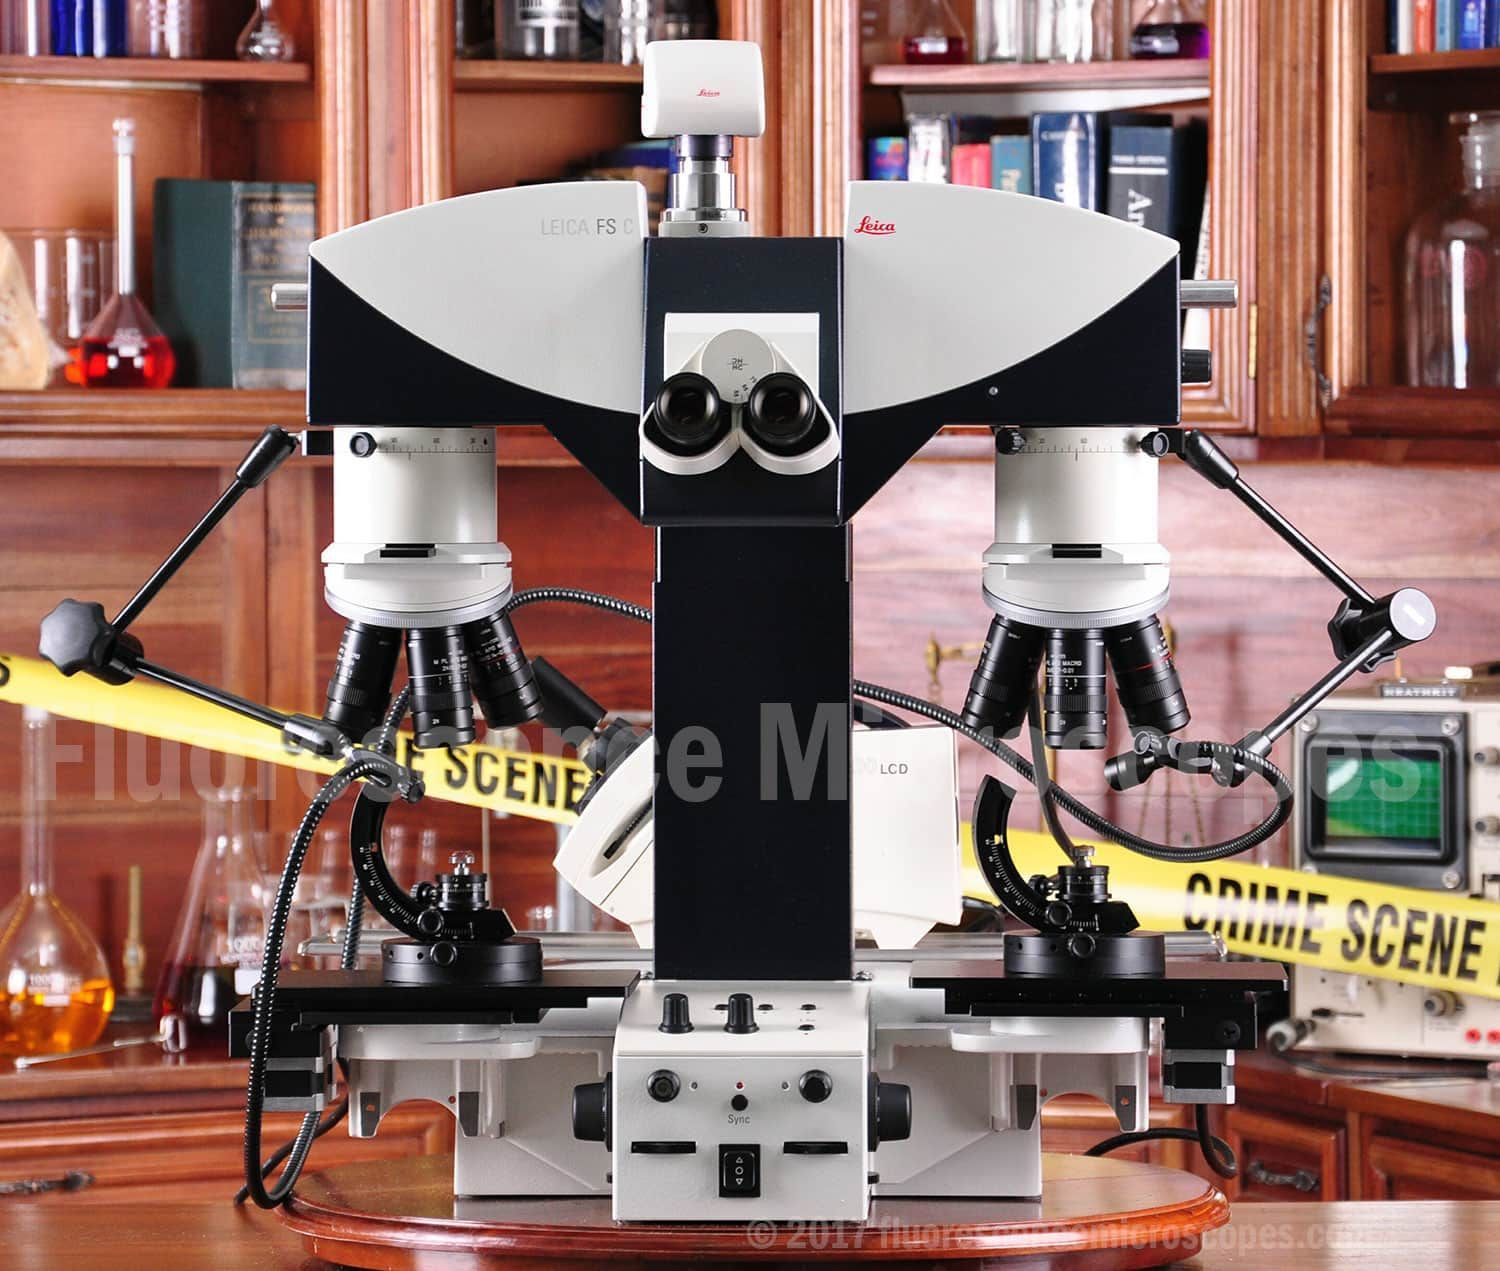 Leica FS C Current Model Motorized Focusing and Stage Forensic Bullet Comparison Macroscope Microscope